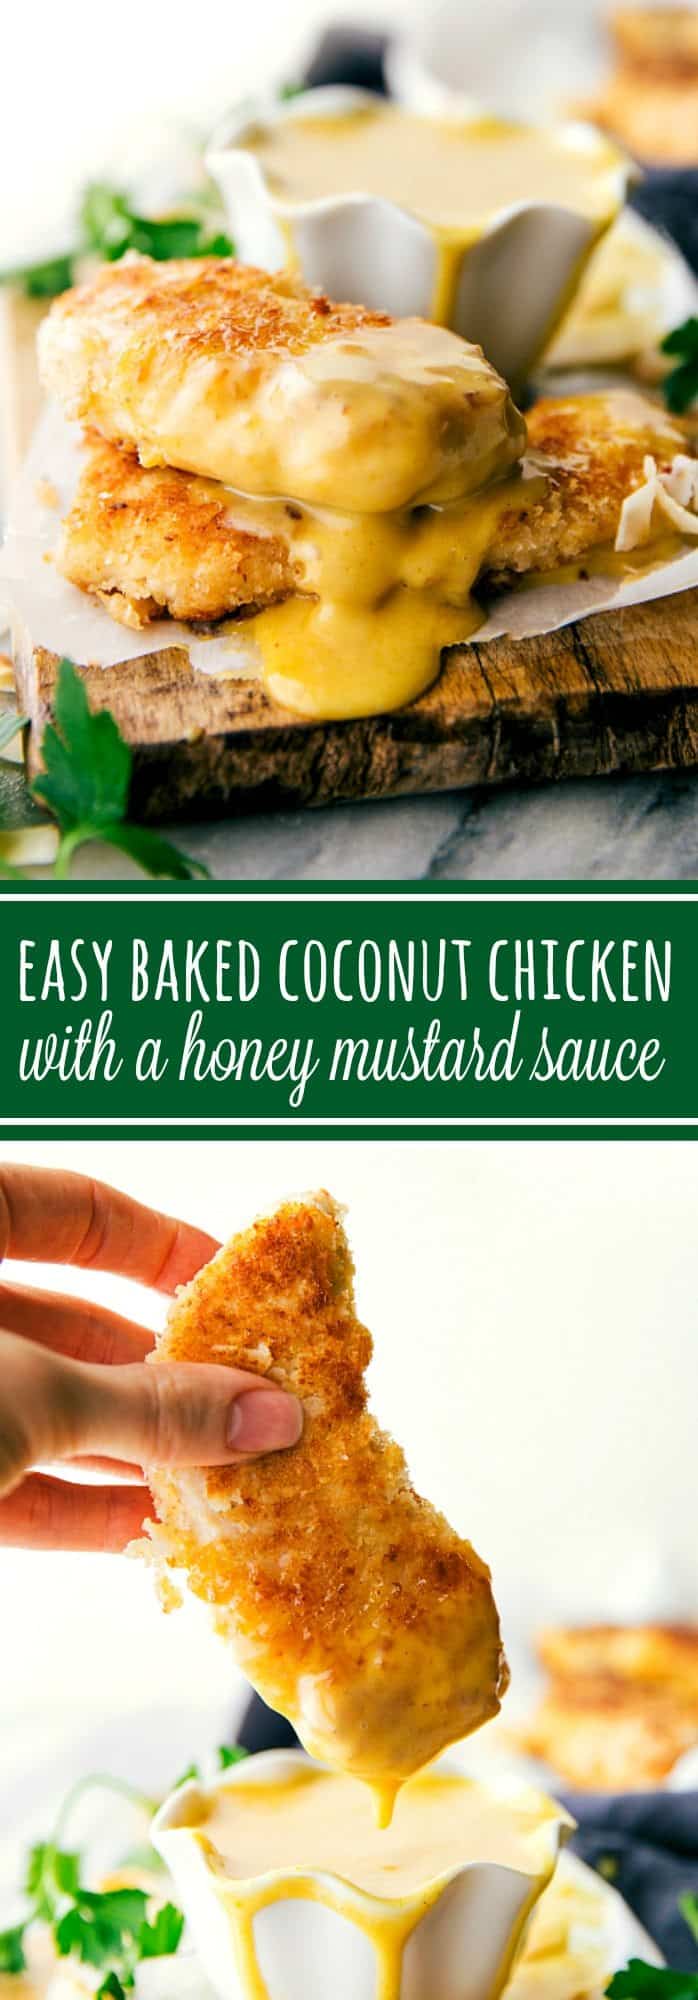 Delicious and simple baked coconut-crusted chicken tenders with an easy five-ingredient honey mustard dipping sauce.